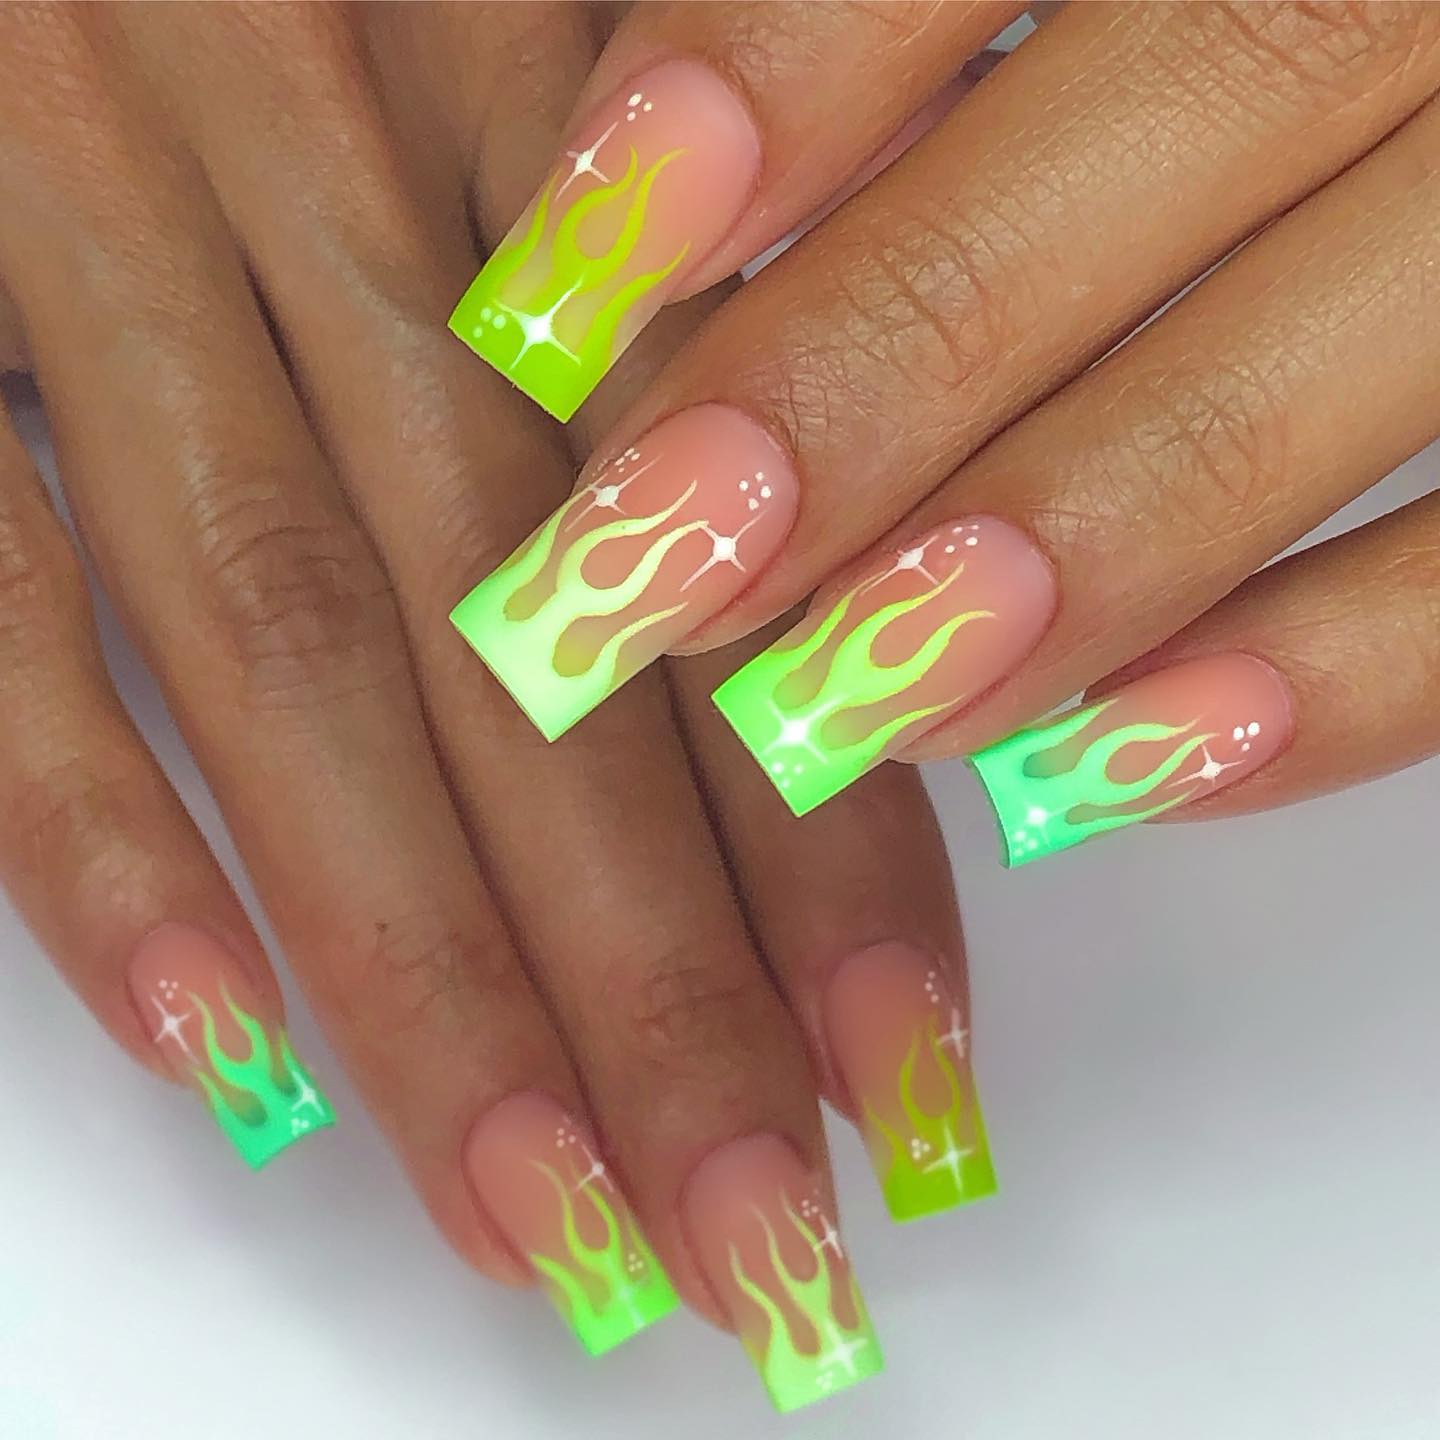 Neon heat waves are all you need to get the feeling of perfection. For each nail, different shade of neon green is applied. With their vivid and bright colors, these flames will make you rock.